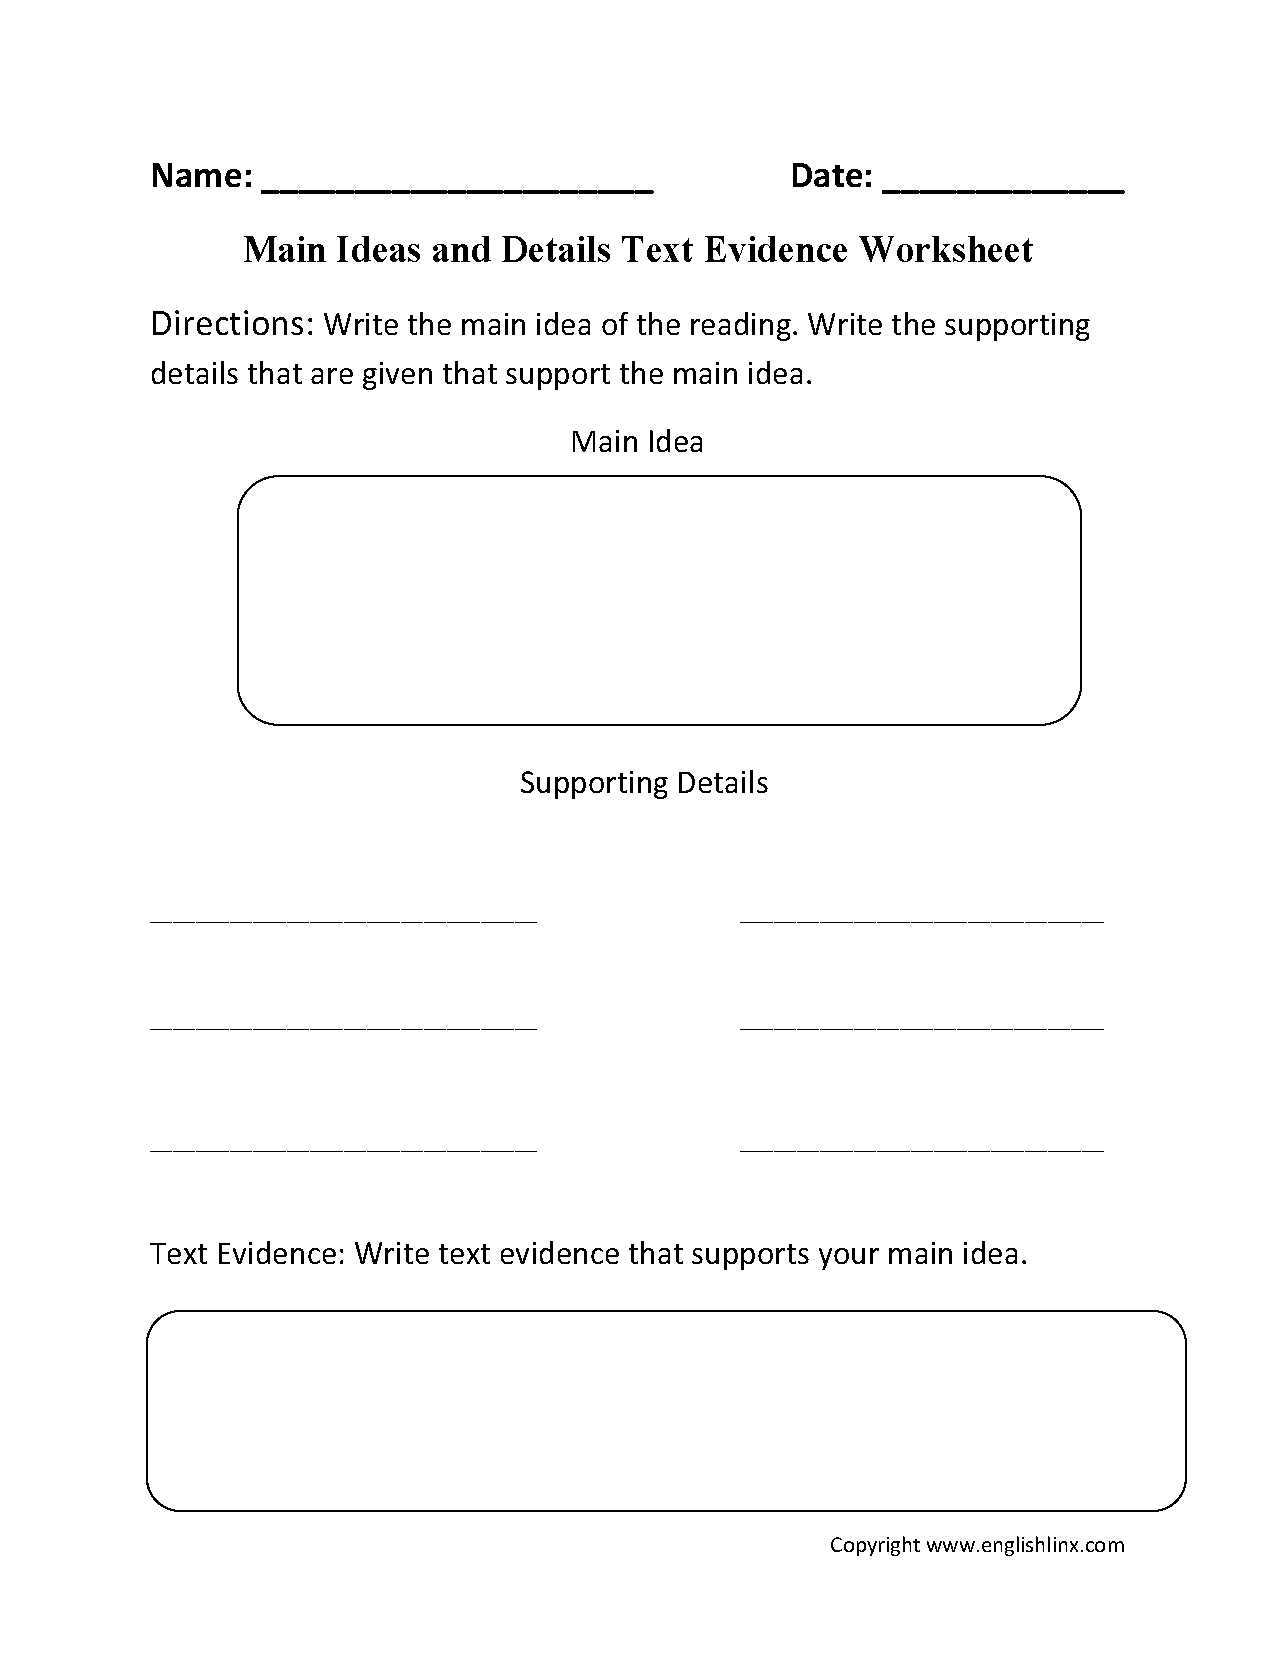 Inferences Worksheet 1 together with Main Idea Worksheets Englishlinx Board